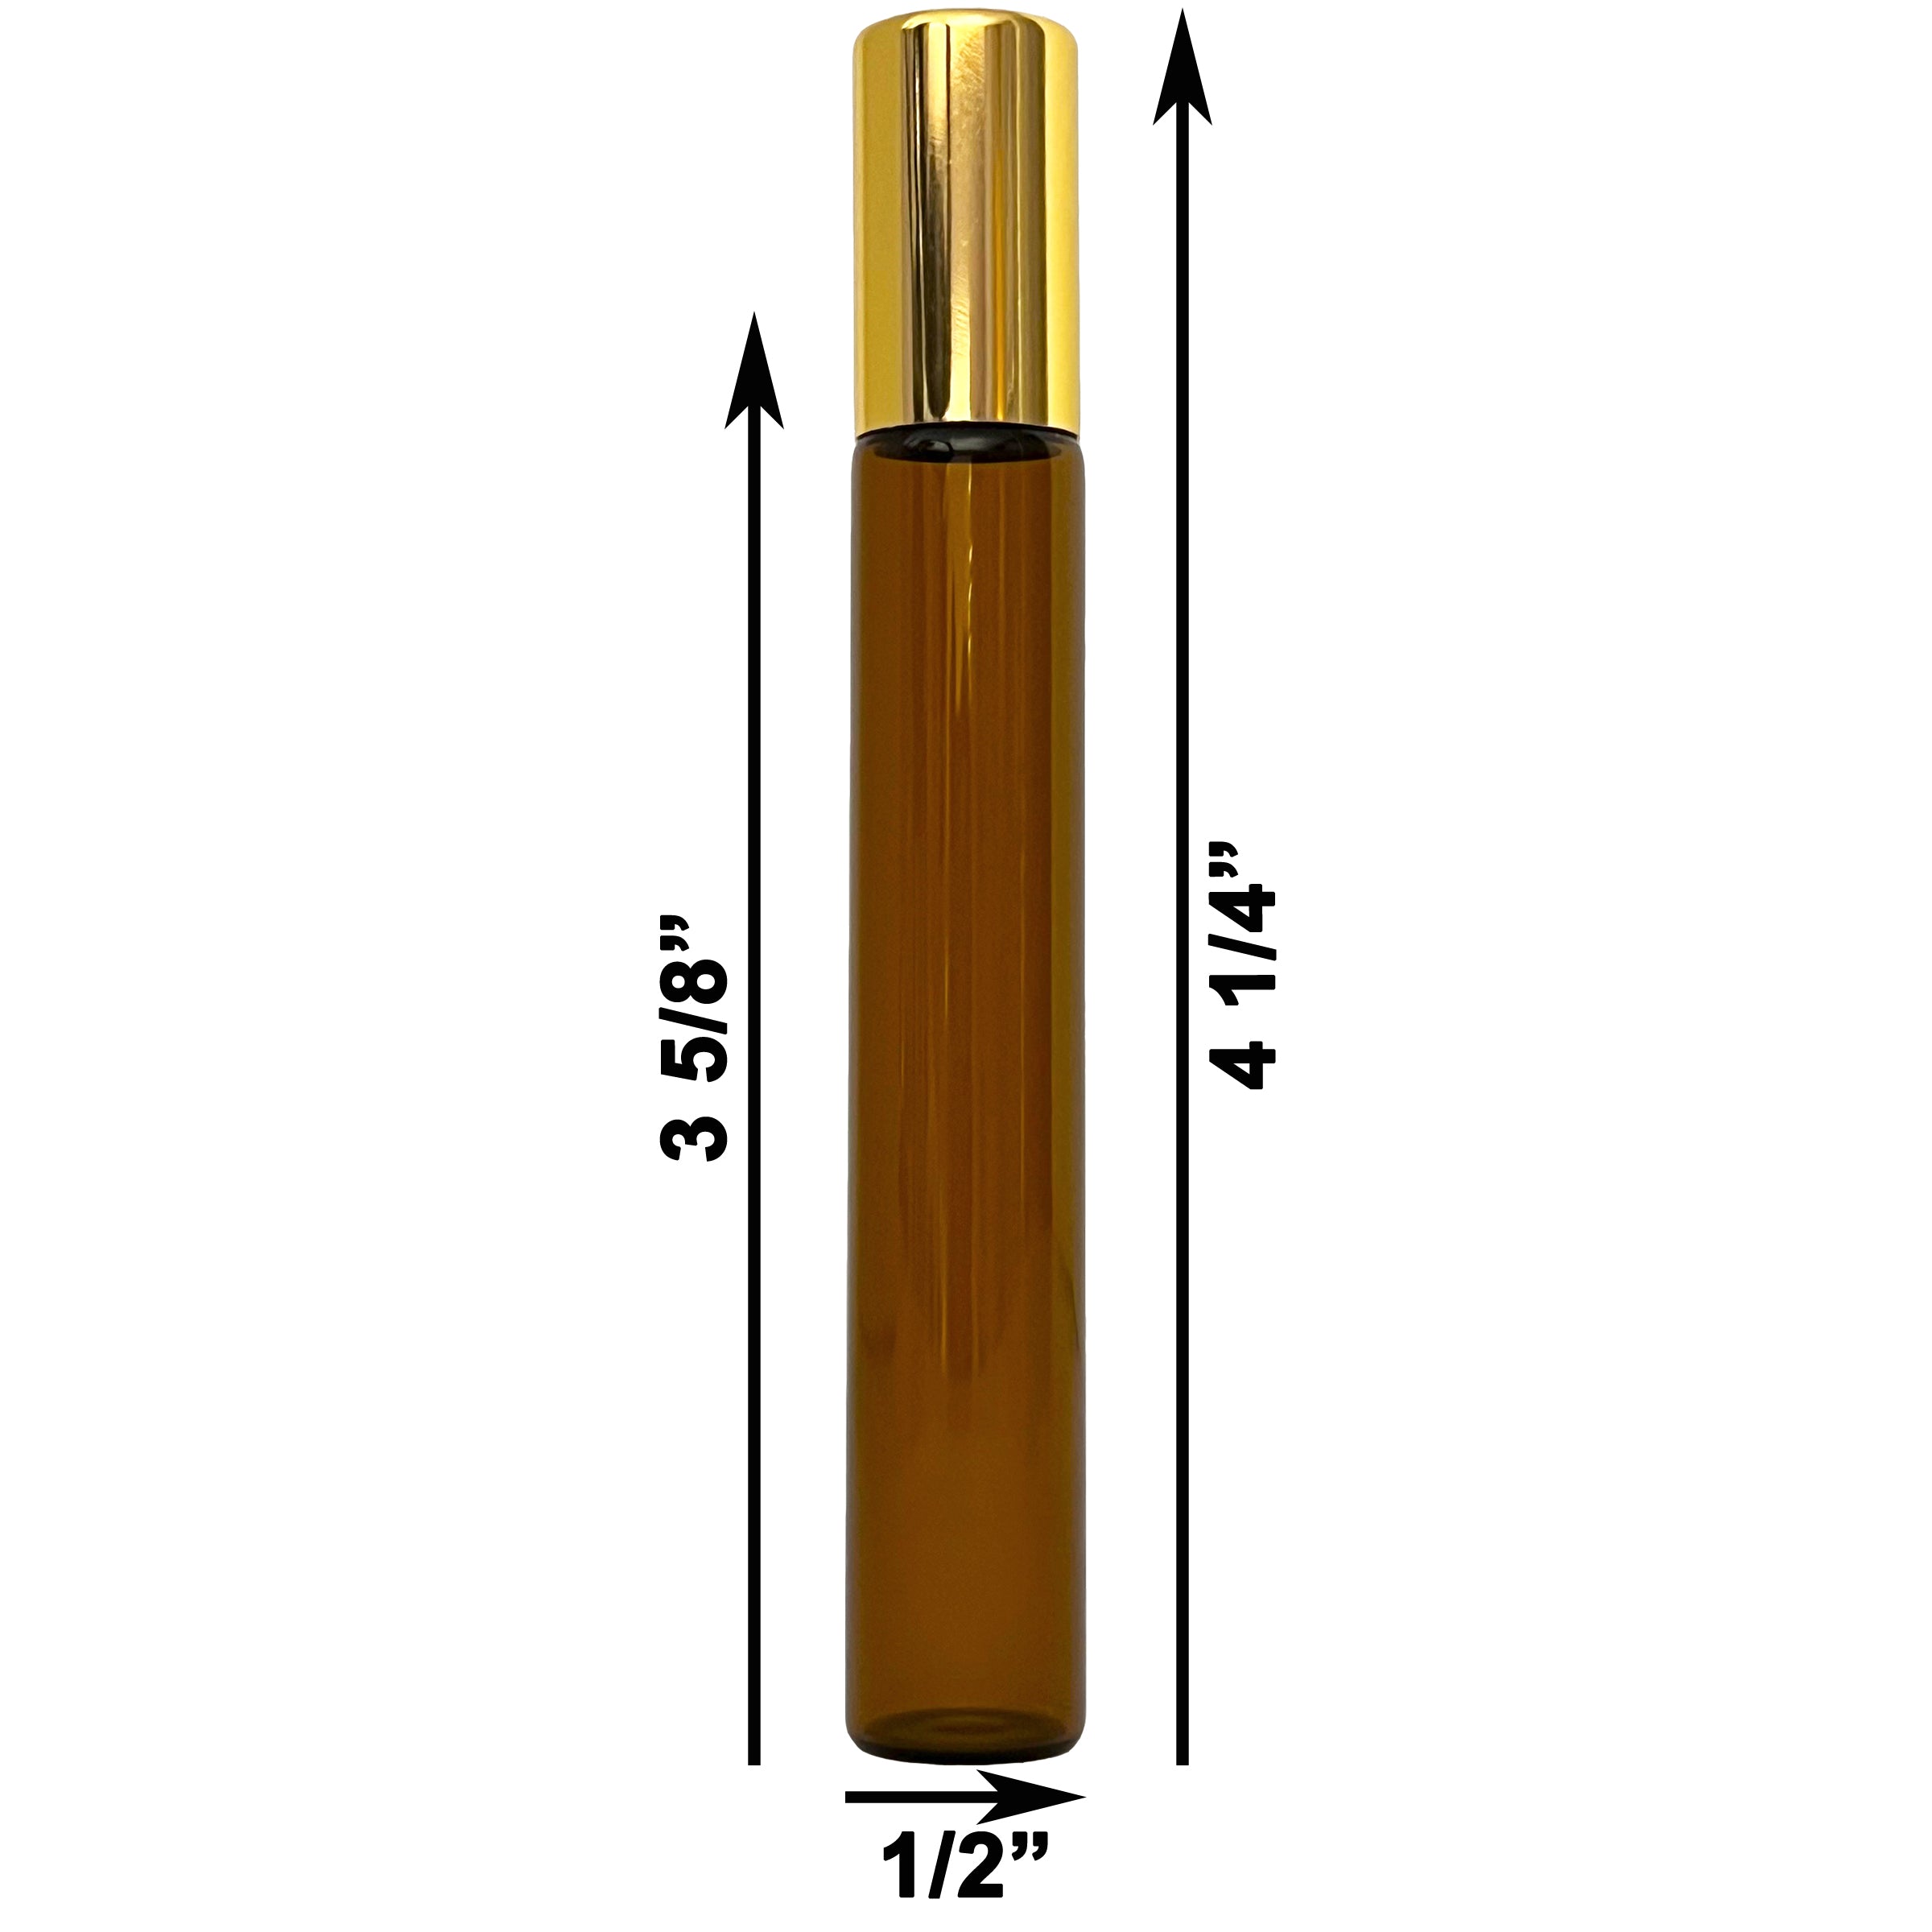 10ml 0.33oz Amber Gold Tall Glass Roll On Roller Bottle Perfume Essential Oils